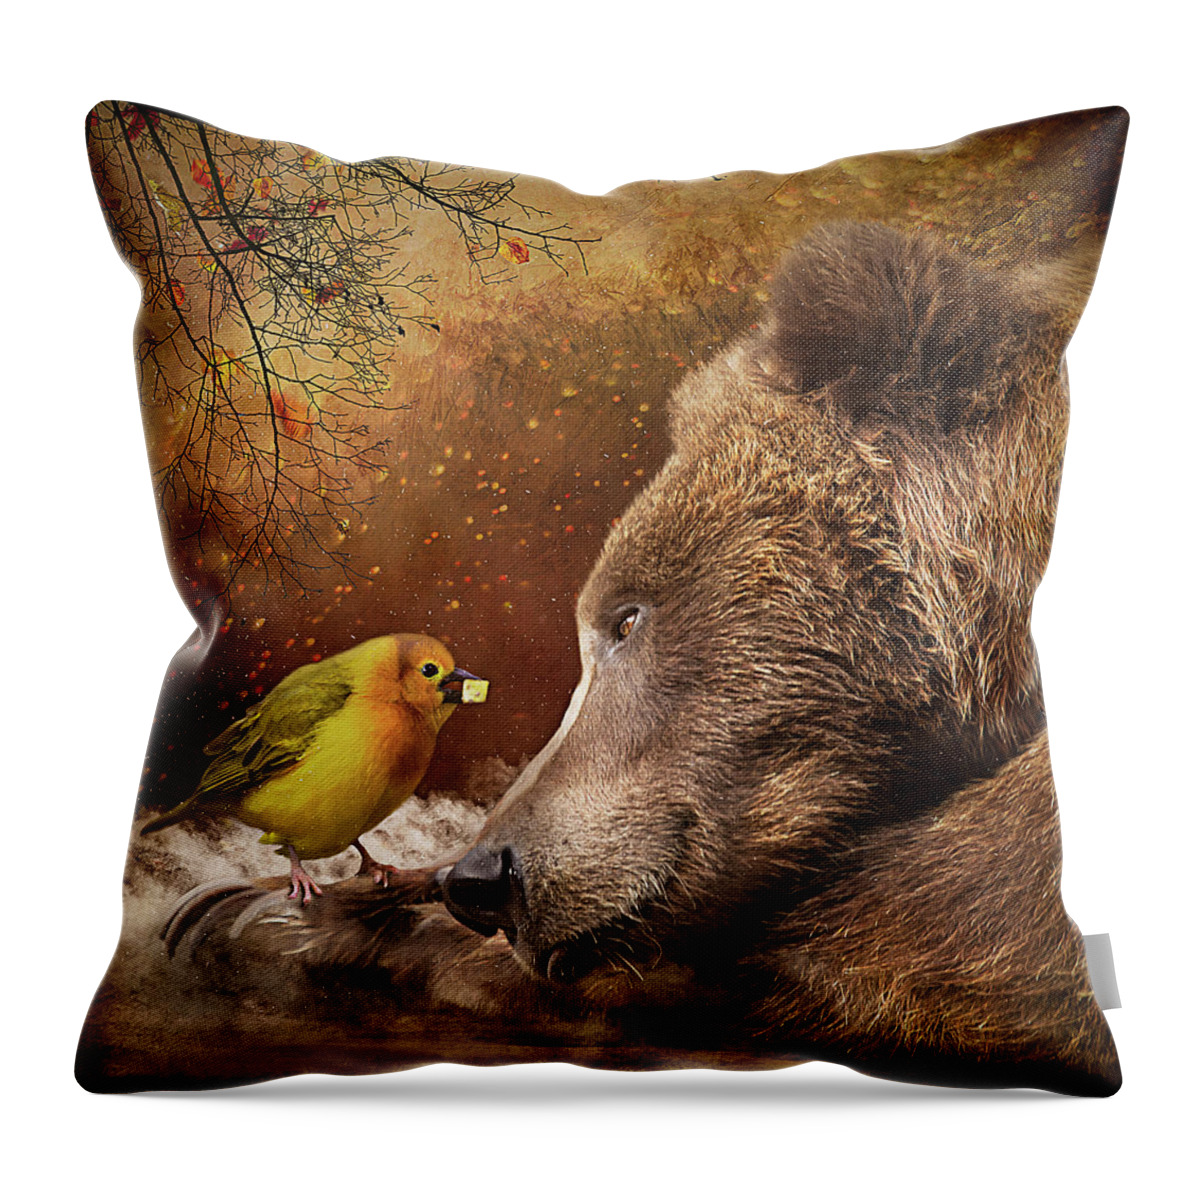 Bear Throw Pillow featuring the digital art The Gift by Maggy Pease